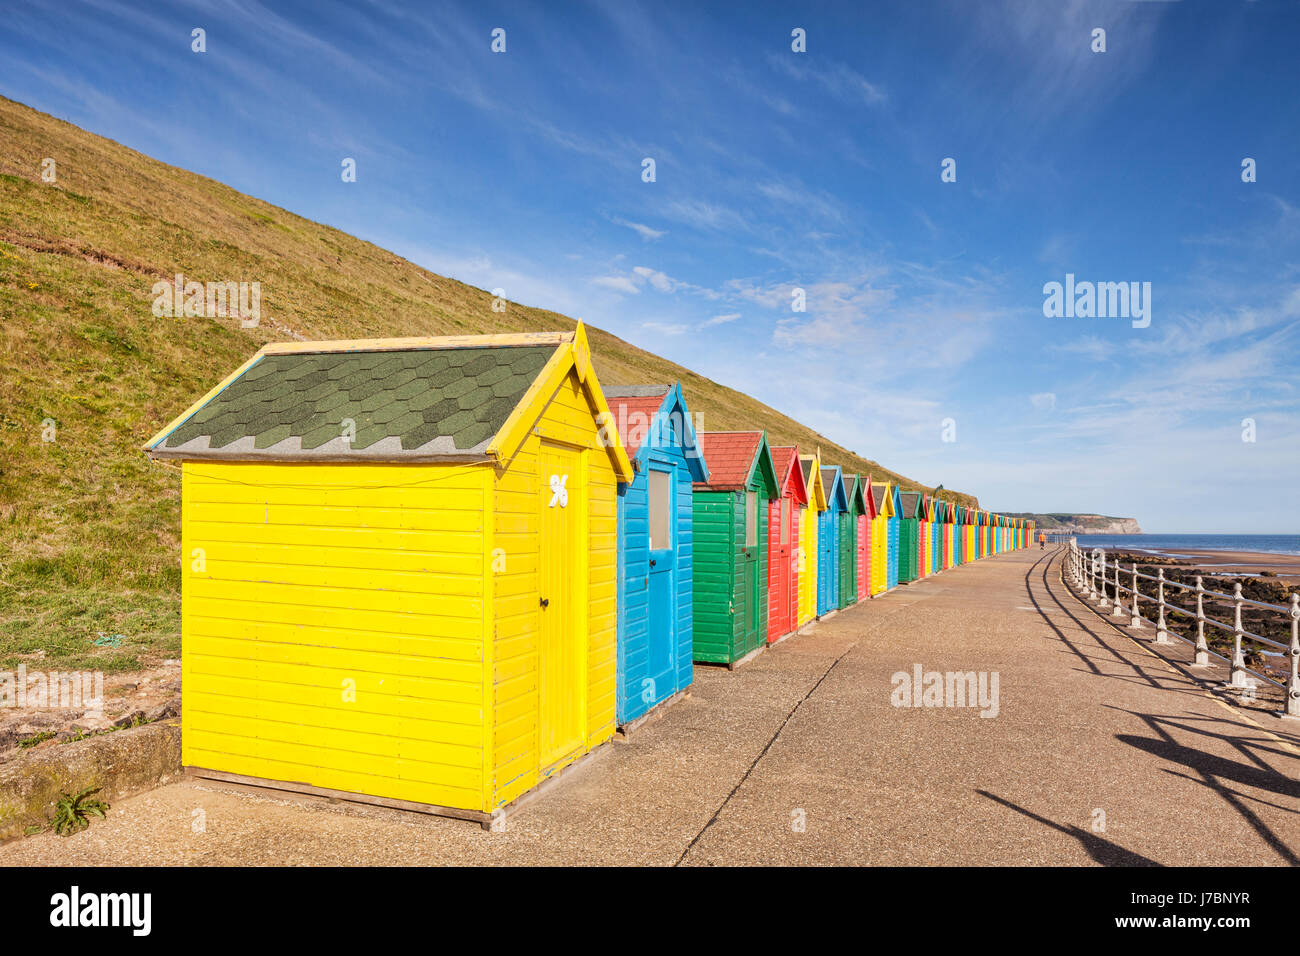 Colourful beach huts lining the promenade at North Beach, Whitby, North Yorkshire, England, UK, early on a bright sunny spring morning. Stock Photo